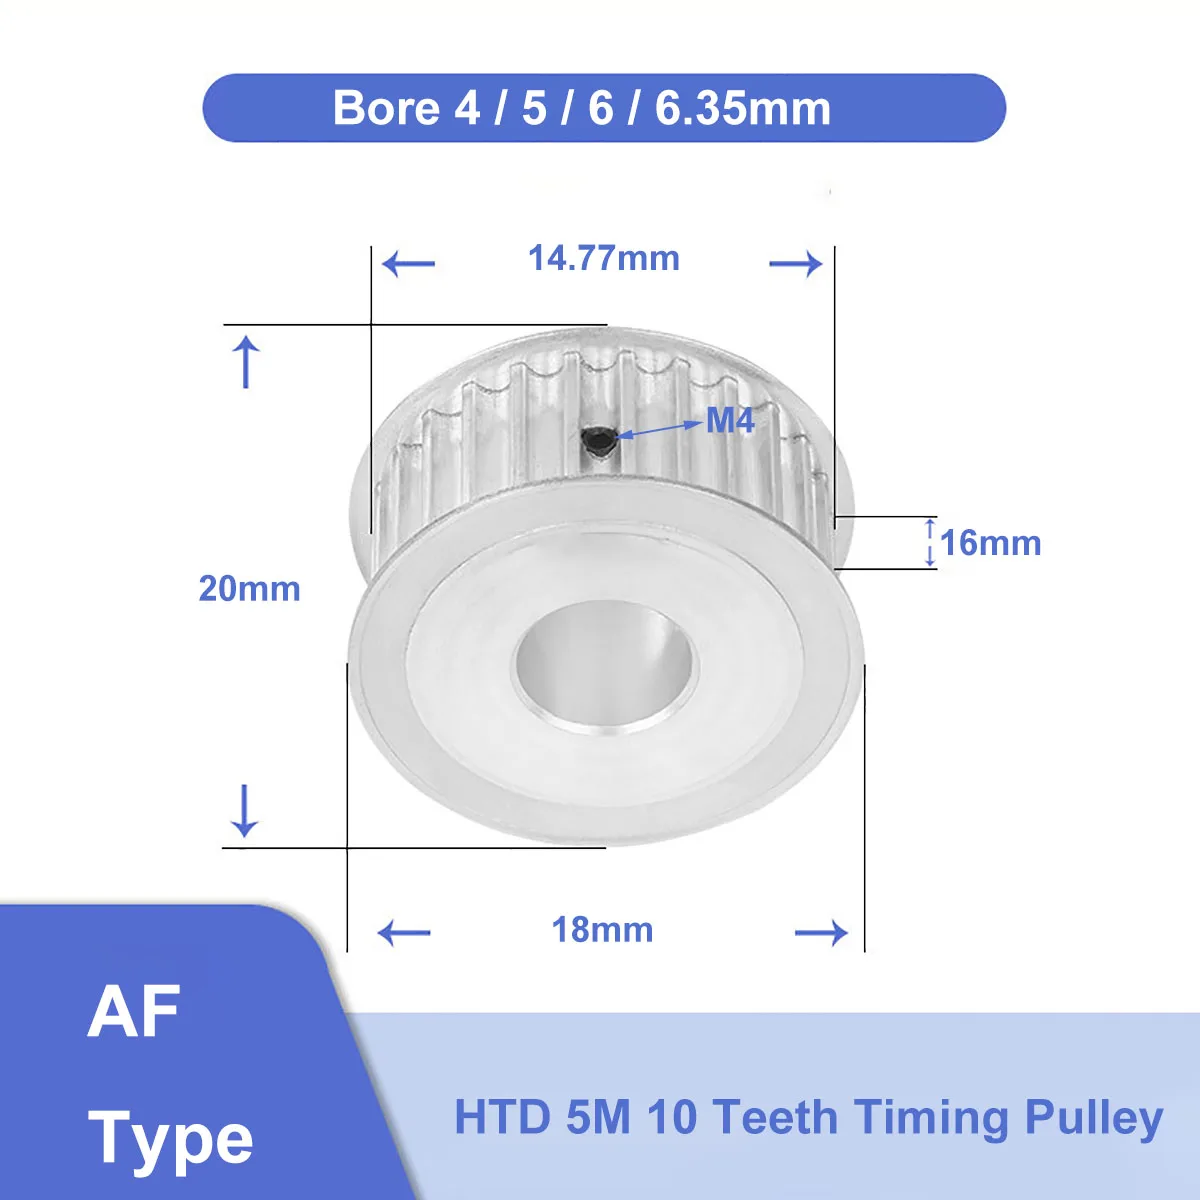 

HTD 5M 10 Teeth Timing Pulley Synchronus Wheel Bore 4/5/6/6.35mm Aluminium Idler Pulley 5M-10T 16mm Width for HTD5M Timing Belt